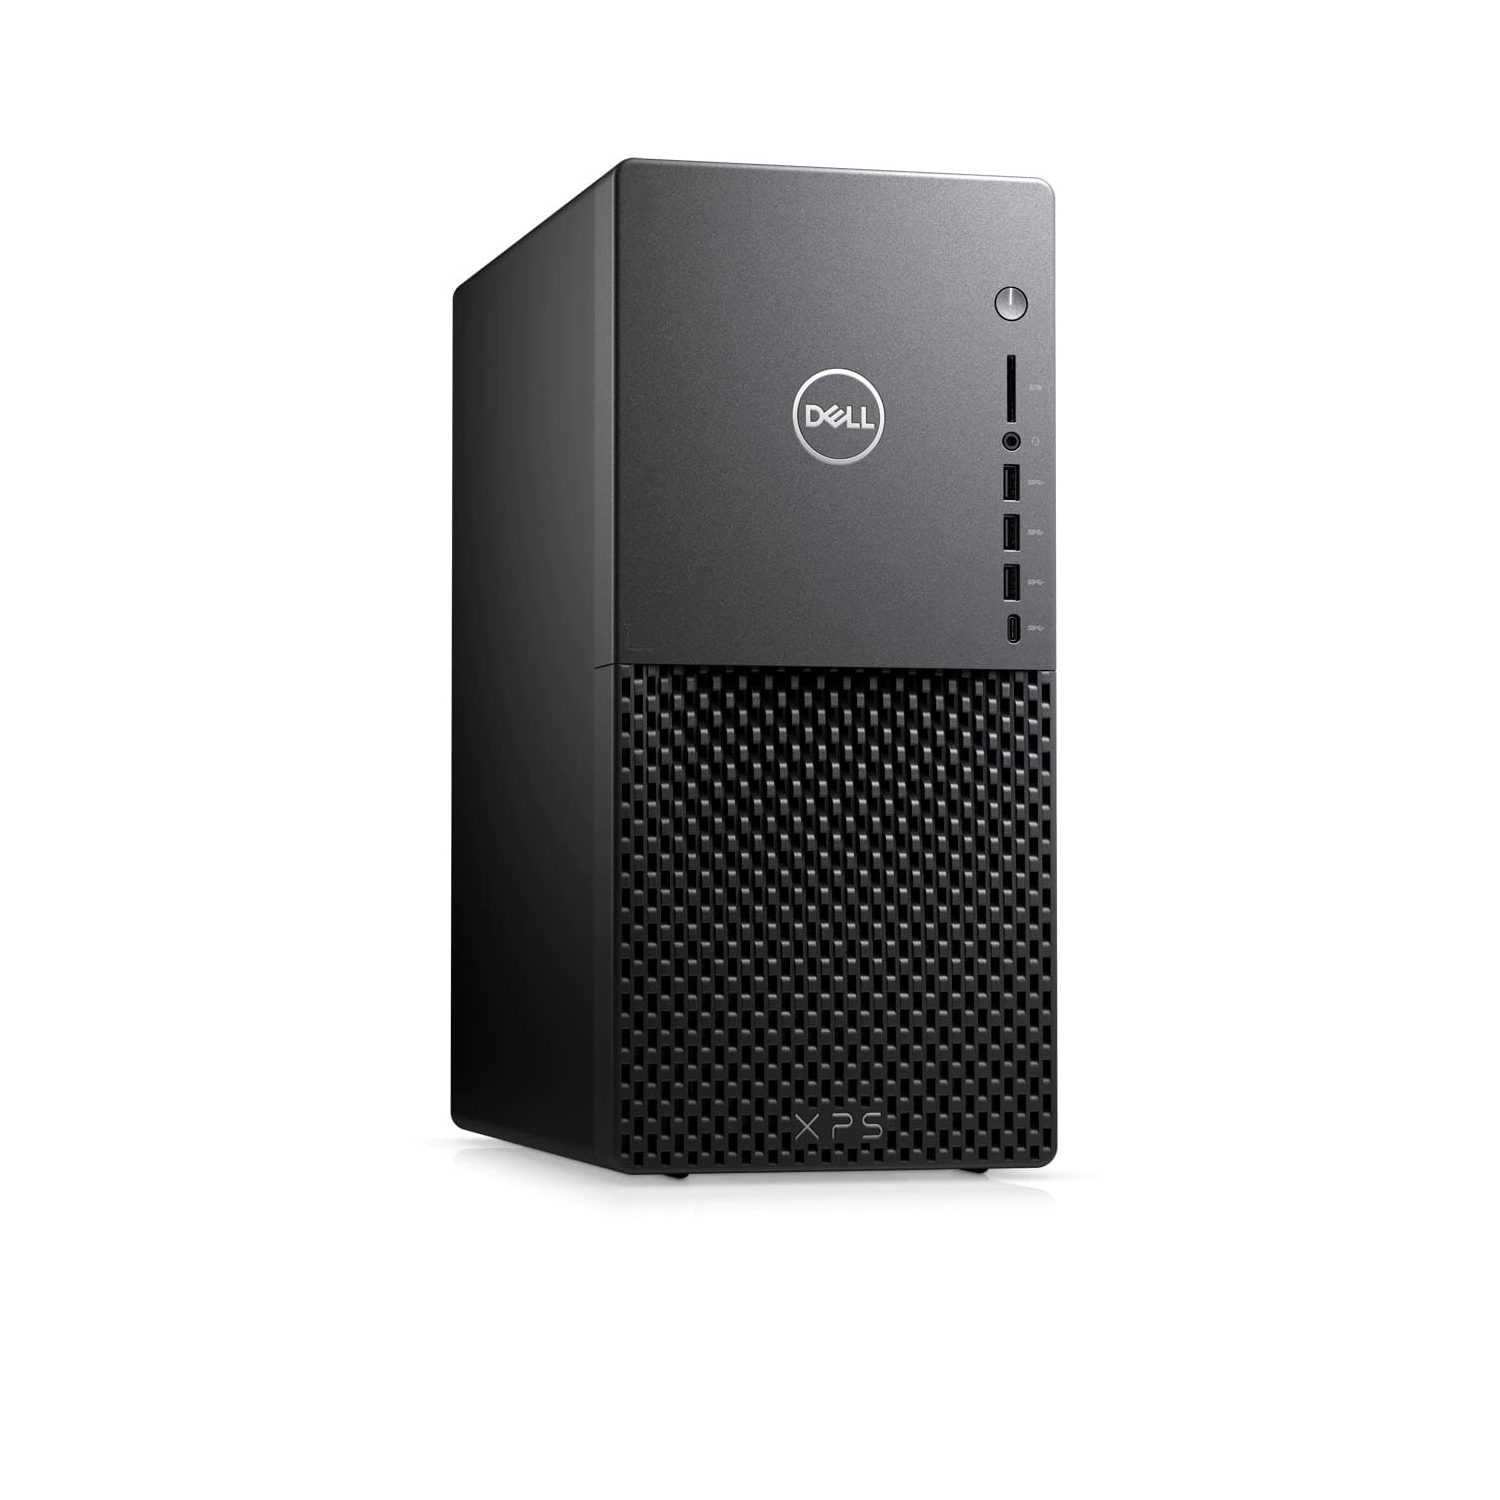 Refurbished (Excellent) - Dell XPS 8940 Desktop (2020) | Core i7 - 2TB HDD + 1TB SSD - 16GB RAM - 1660 Ti | 8 Cores @ 4.8 GHz - 10th Gen CPU Certified Refurbished